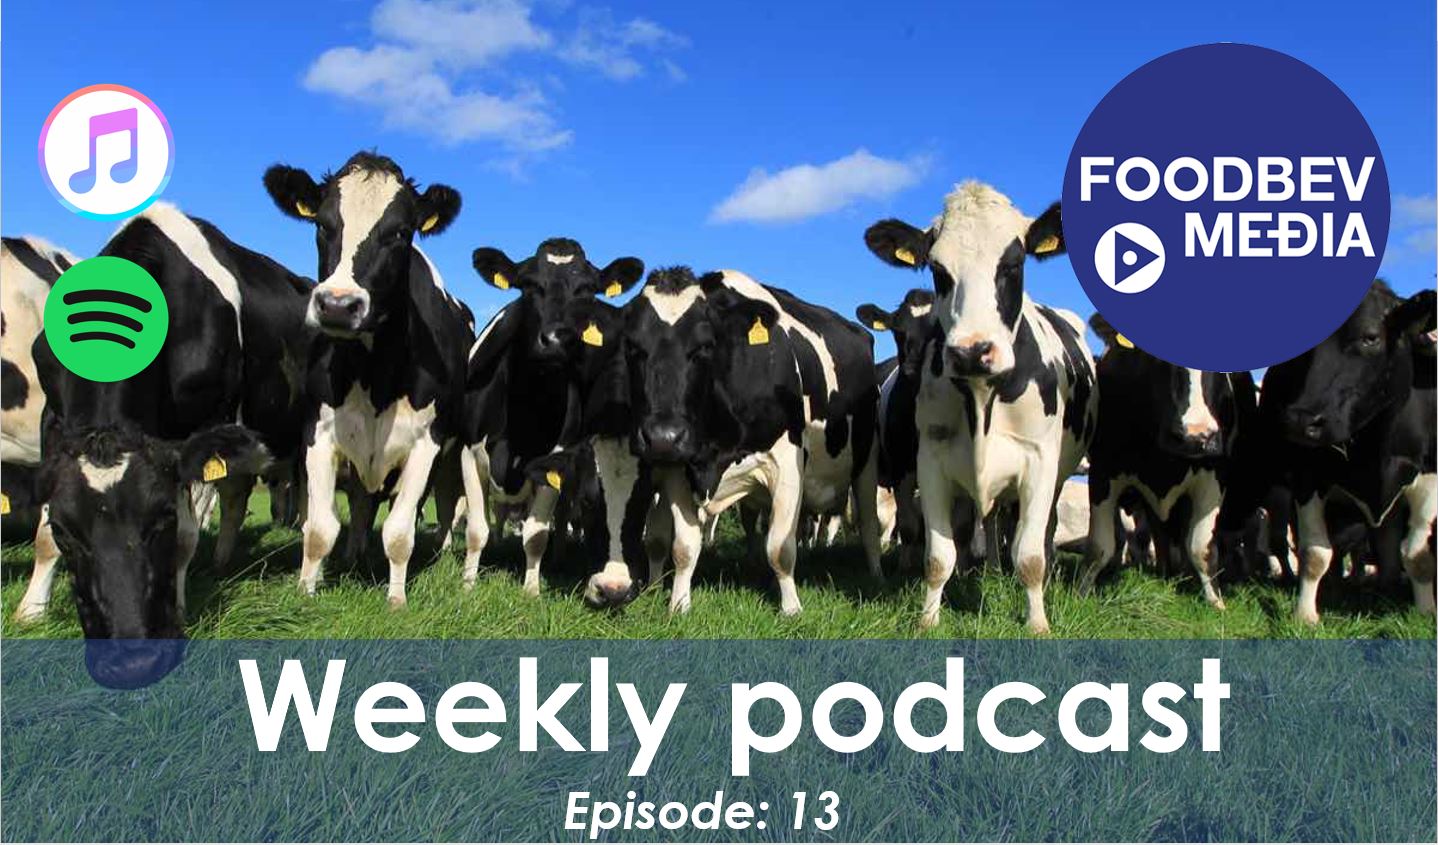 Weekly podcast episode 13: Fonterra, sustainability, senior appointments and more